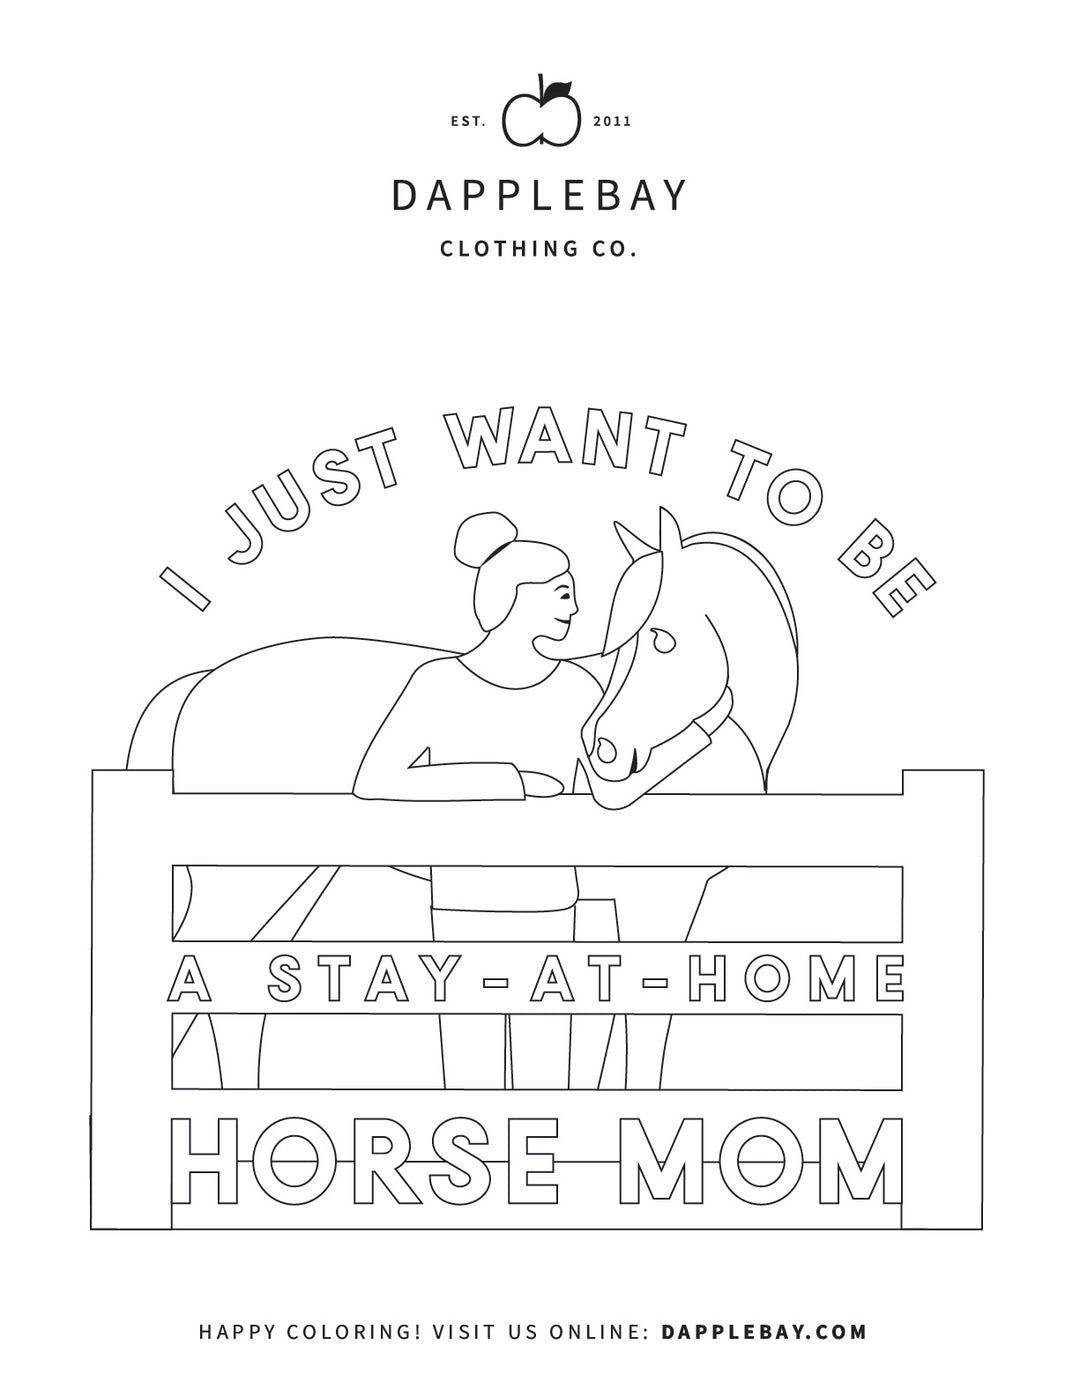 Coloring Page - Horse Mom